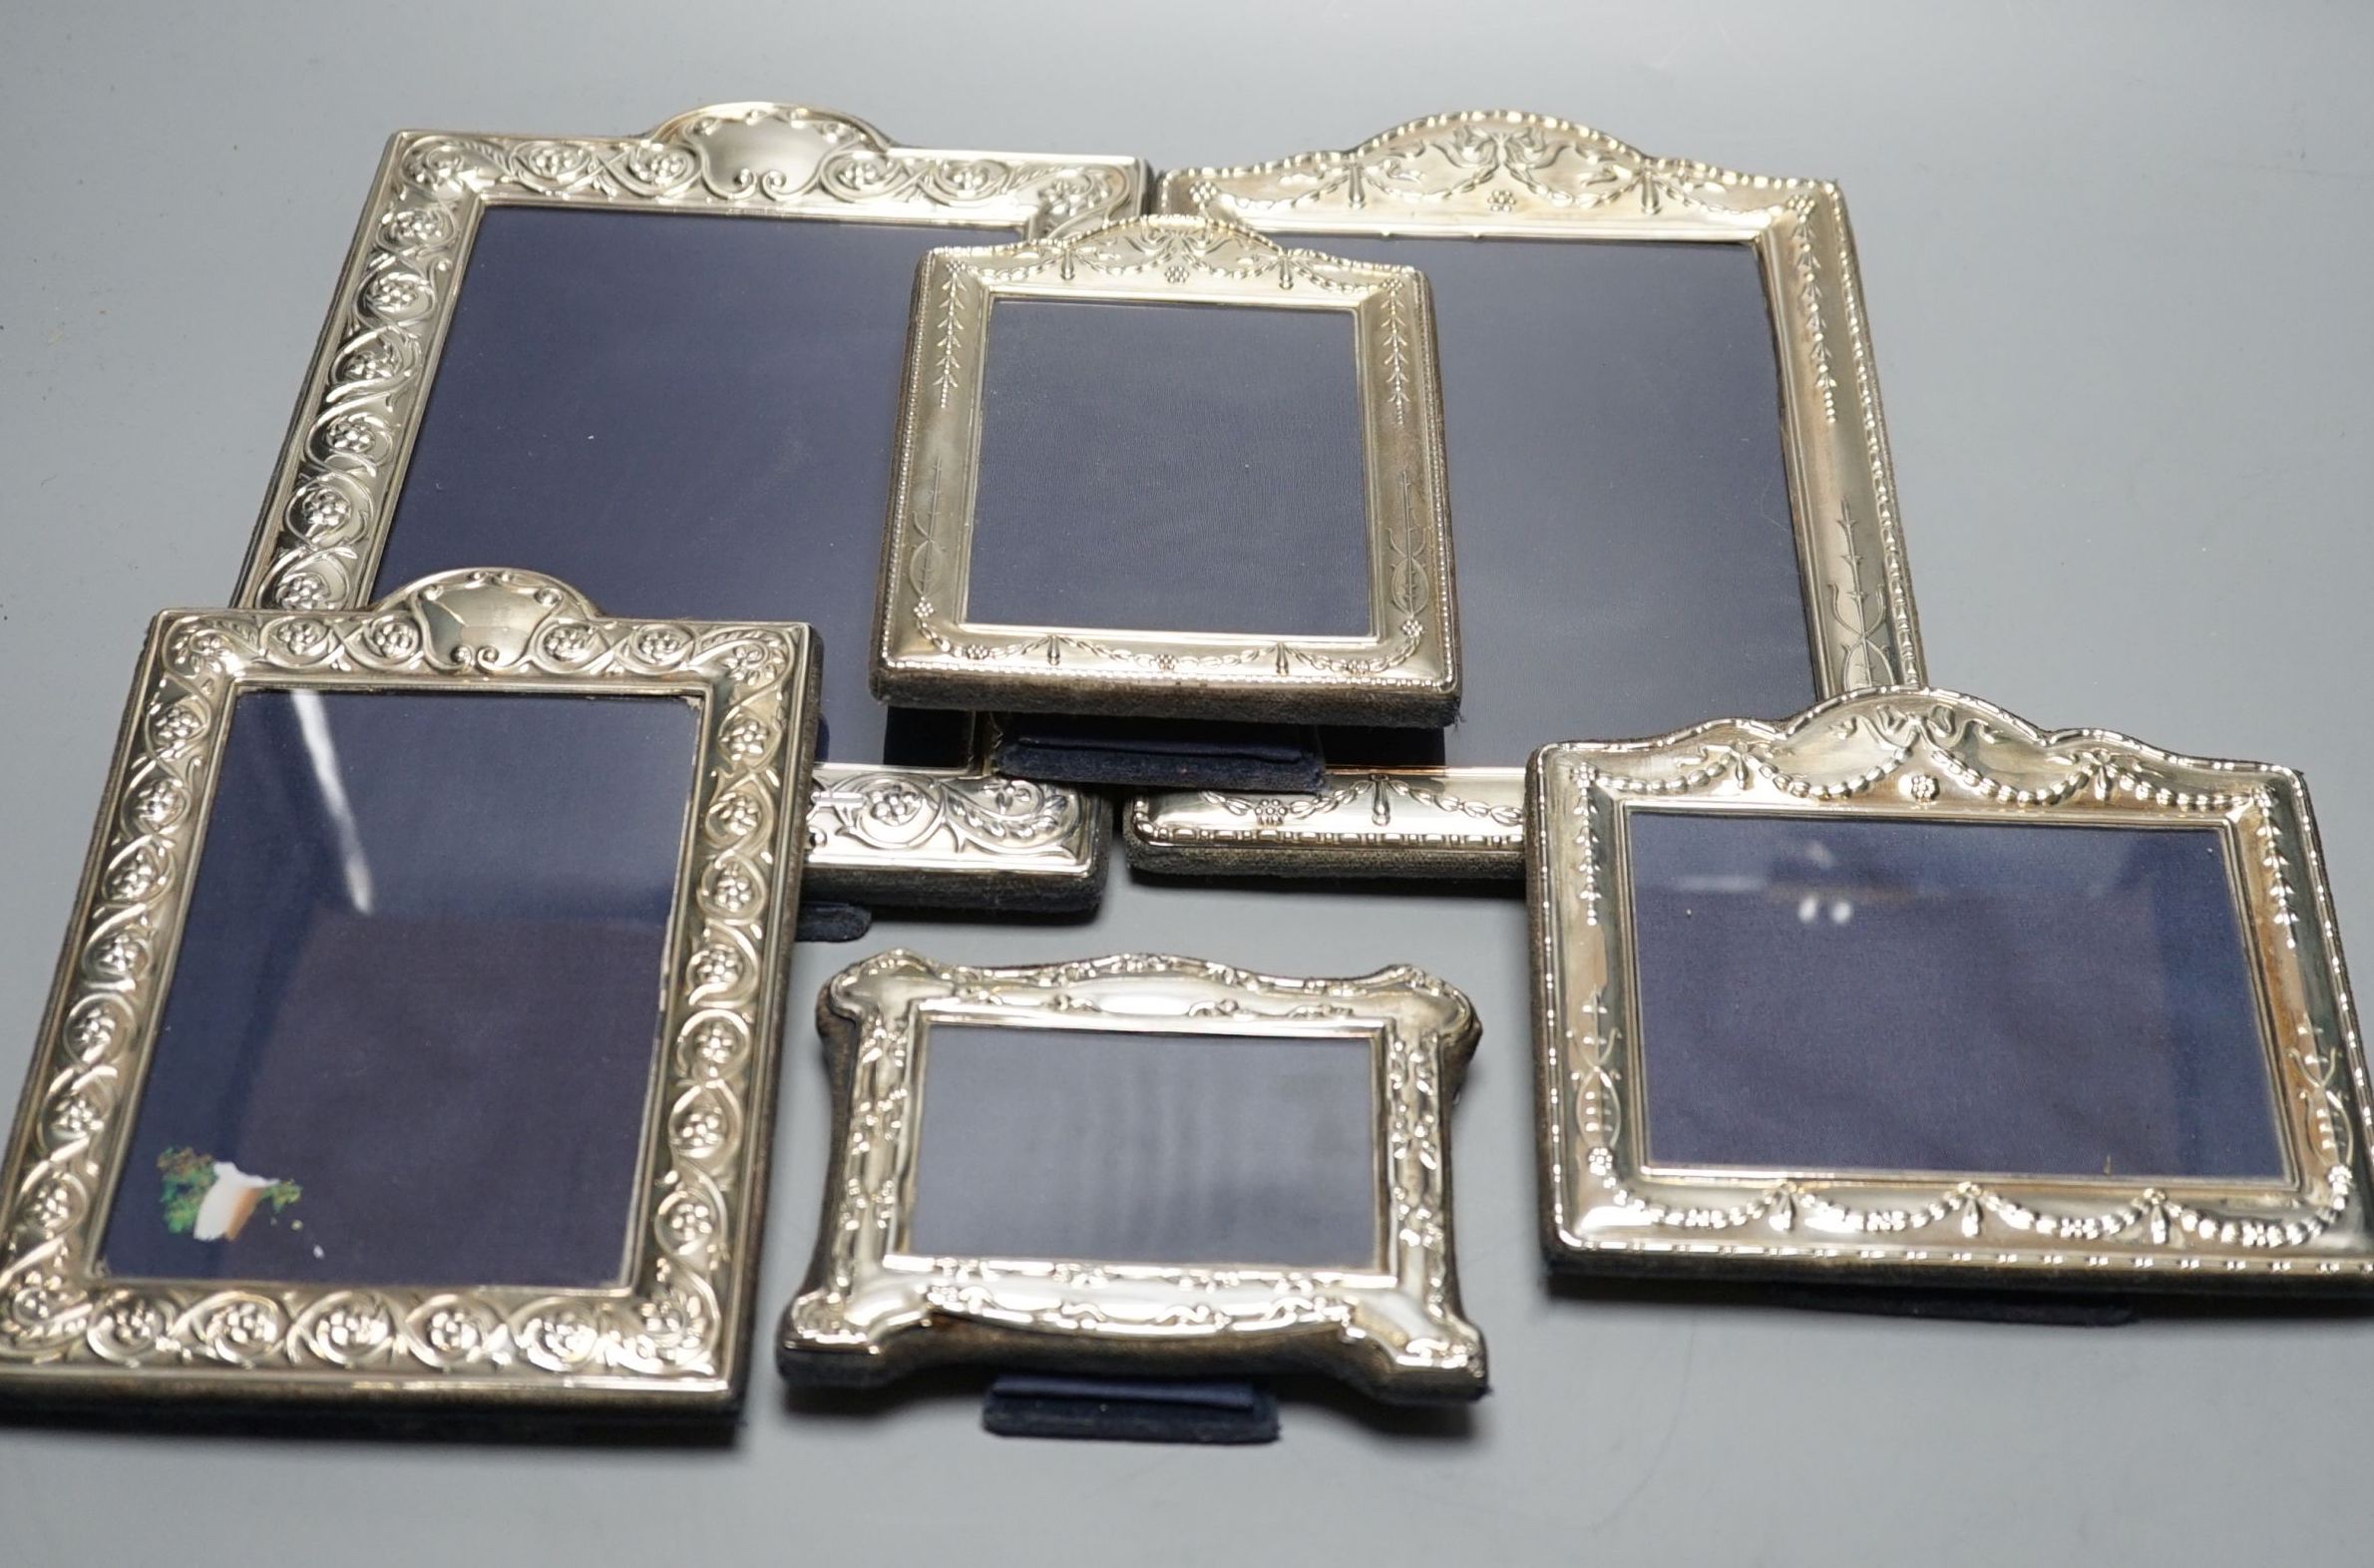 Two modern graduated pairs of decorated silver mounted photograph frames, Carrs of Sheffield, 2000 & 2001, largest 25.6cm and two smaller silver mounted frames.